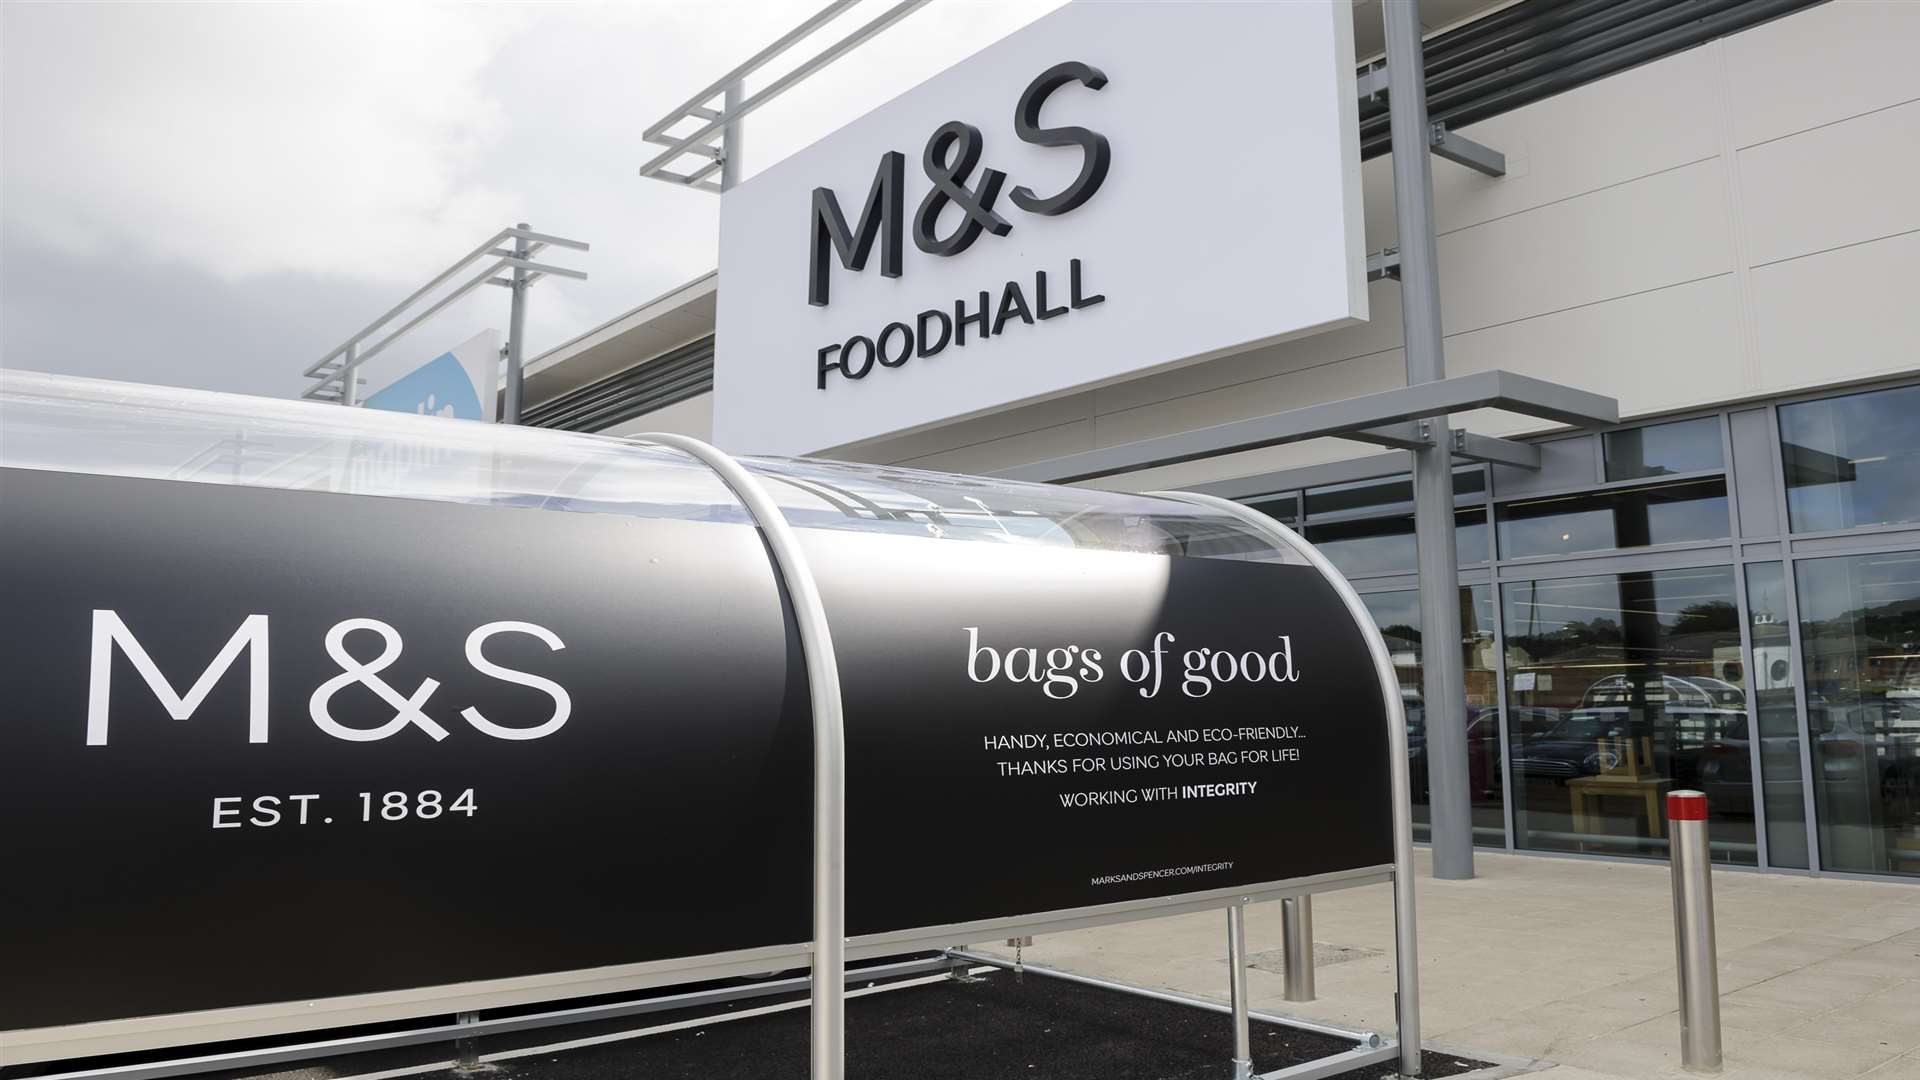 The new M&S Foodhall in Strood